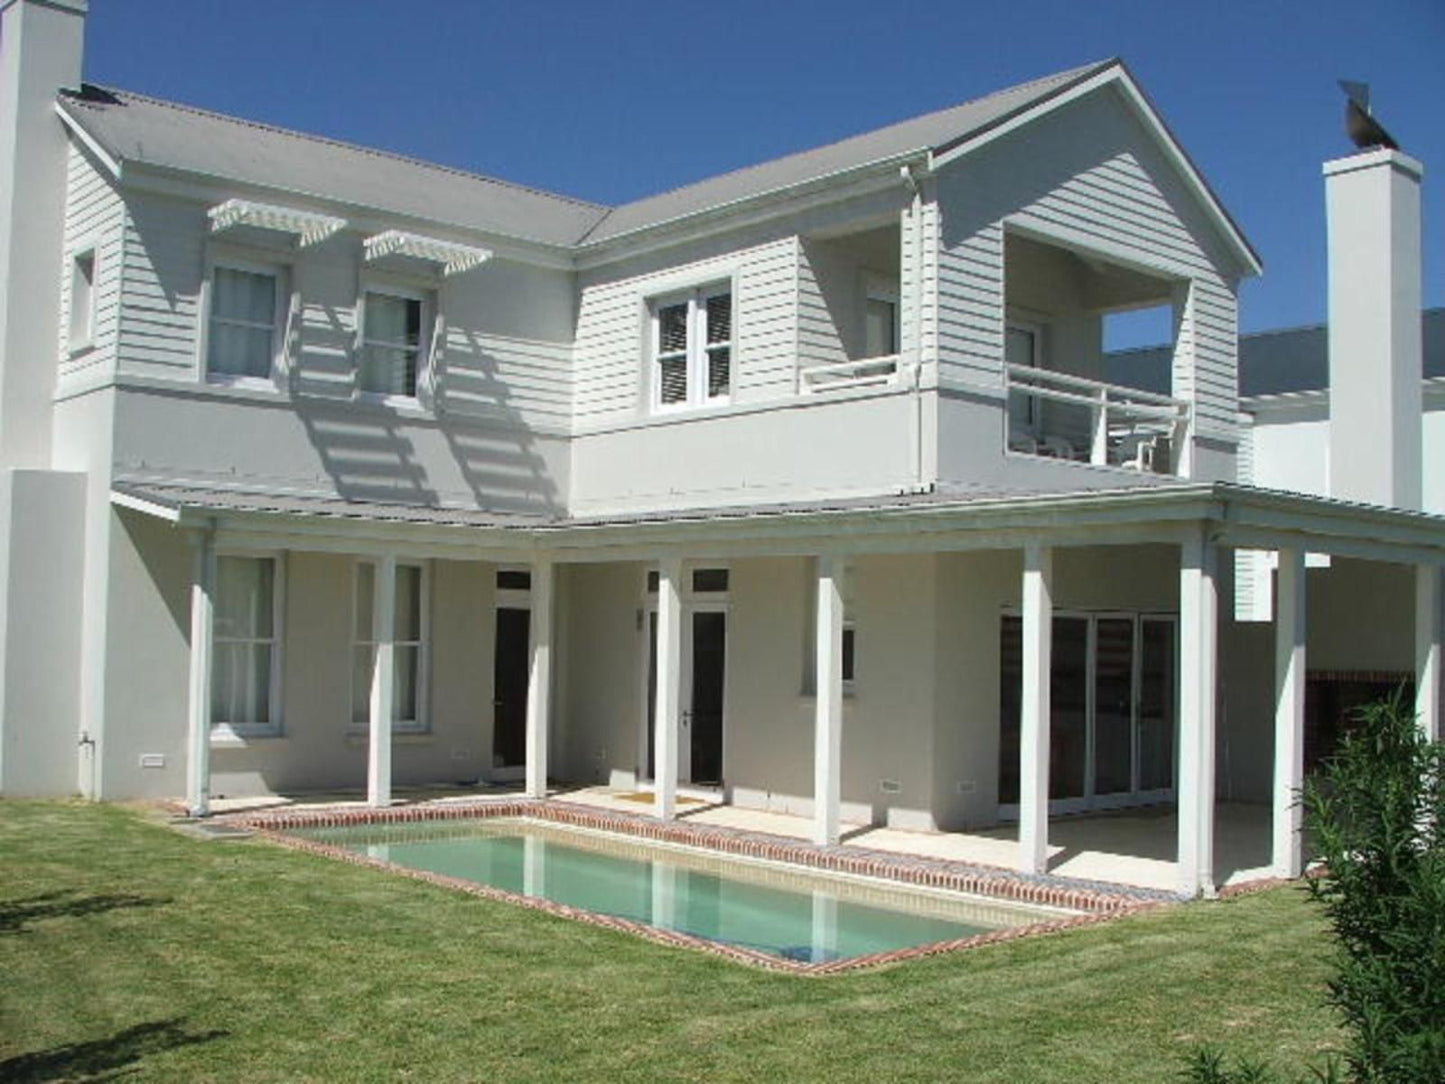 Heron View Self Catering Thesen Island Knysna Western Cape South Africa Building, Architecture, House, Swimming Pool